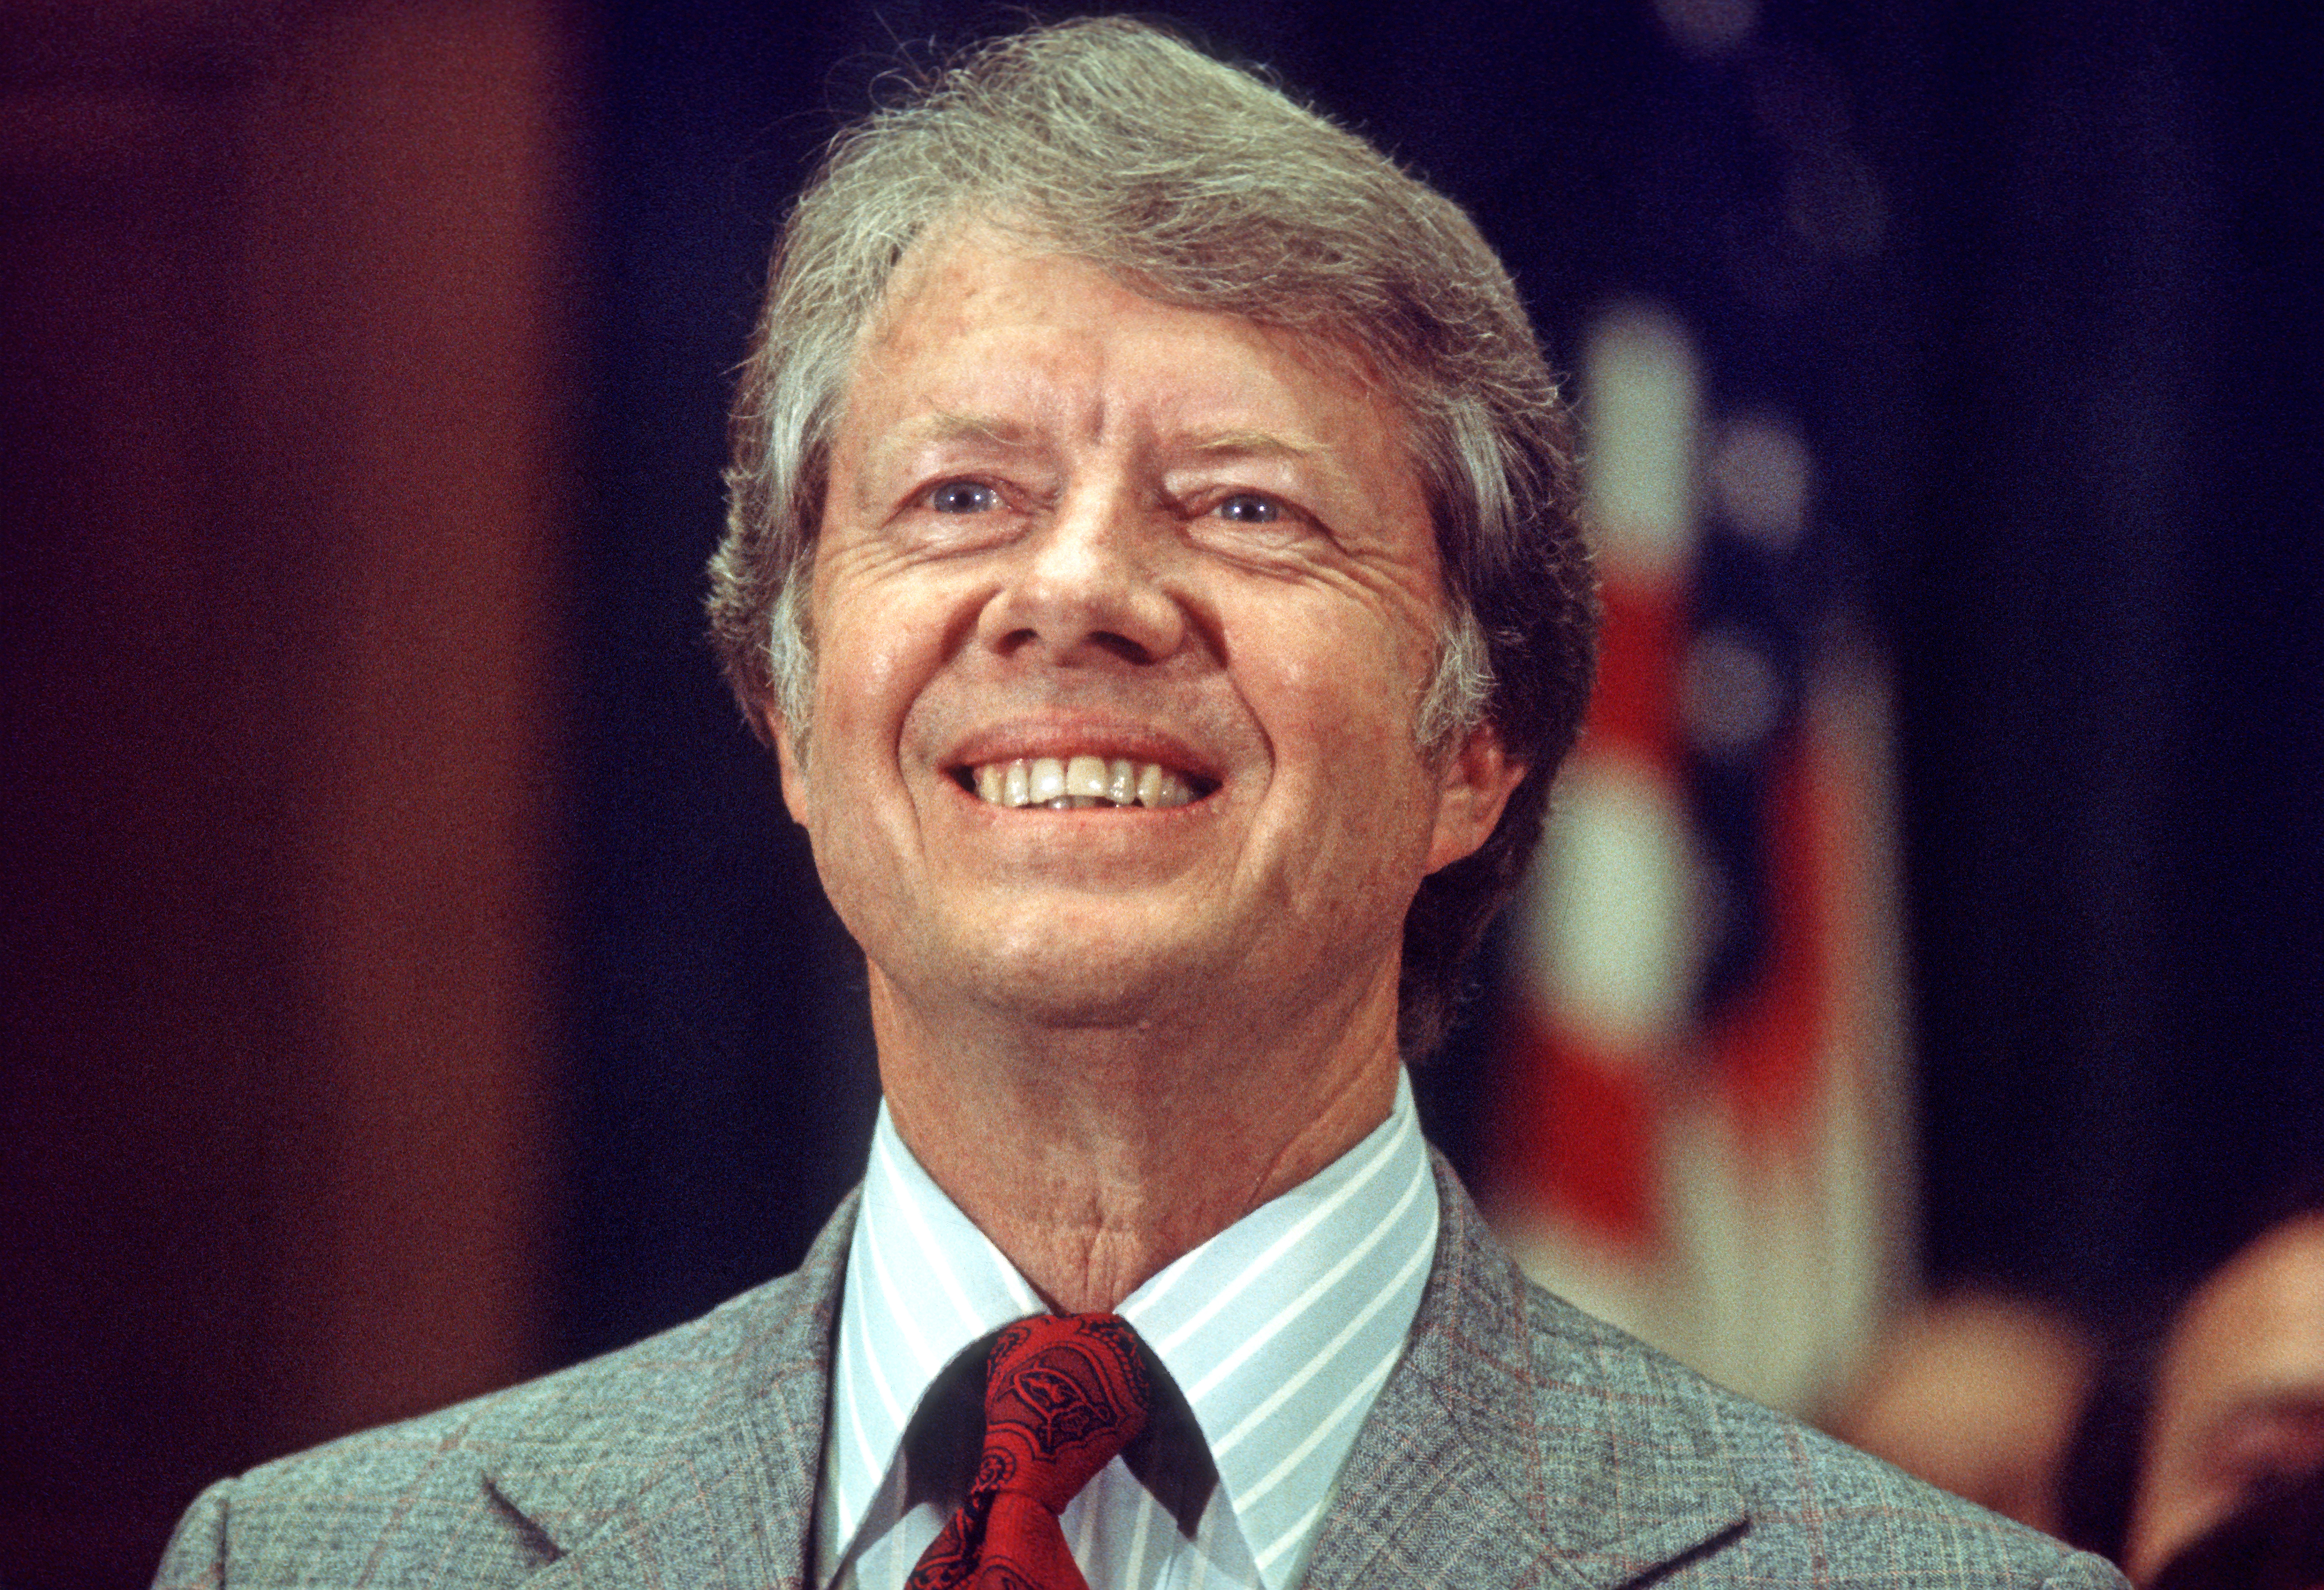 Jimmy Carter at the Rayburn House Office Building, Washington DC on May 15, 1976 | Source: Getty Images